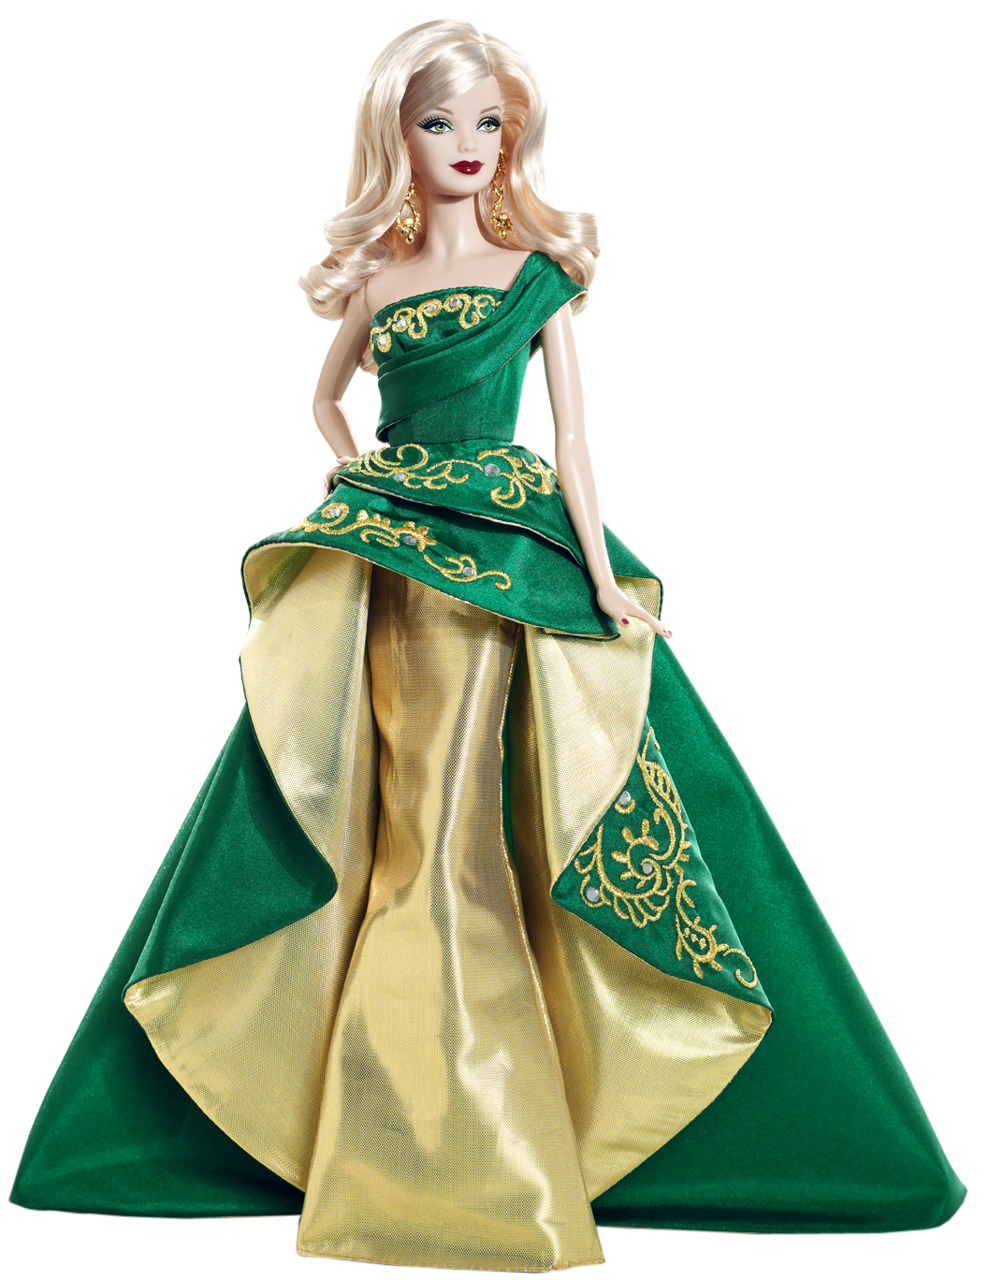 Download Gown Doll Barbie Download Free Image HQ PNG Image | FreePNGImg